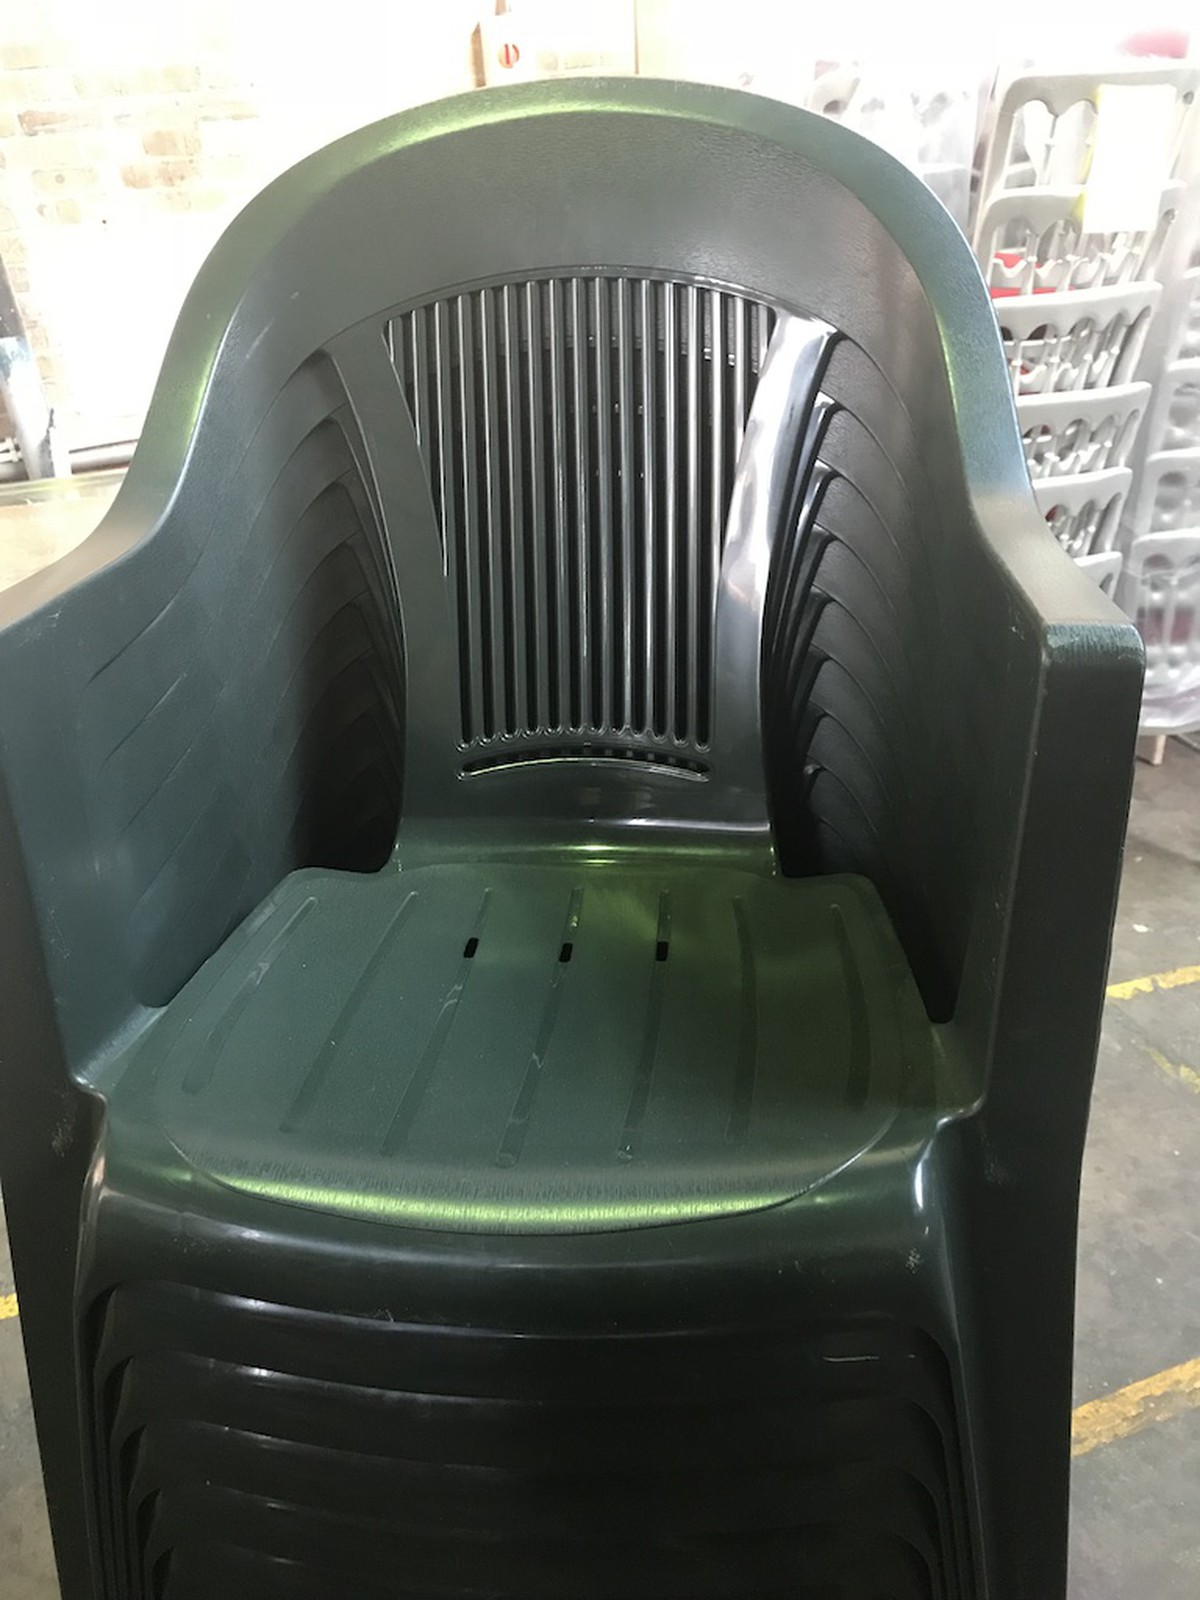 Secondhand Chairs and Tables | Plastic Bistro Chairs | 250x Green Patio